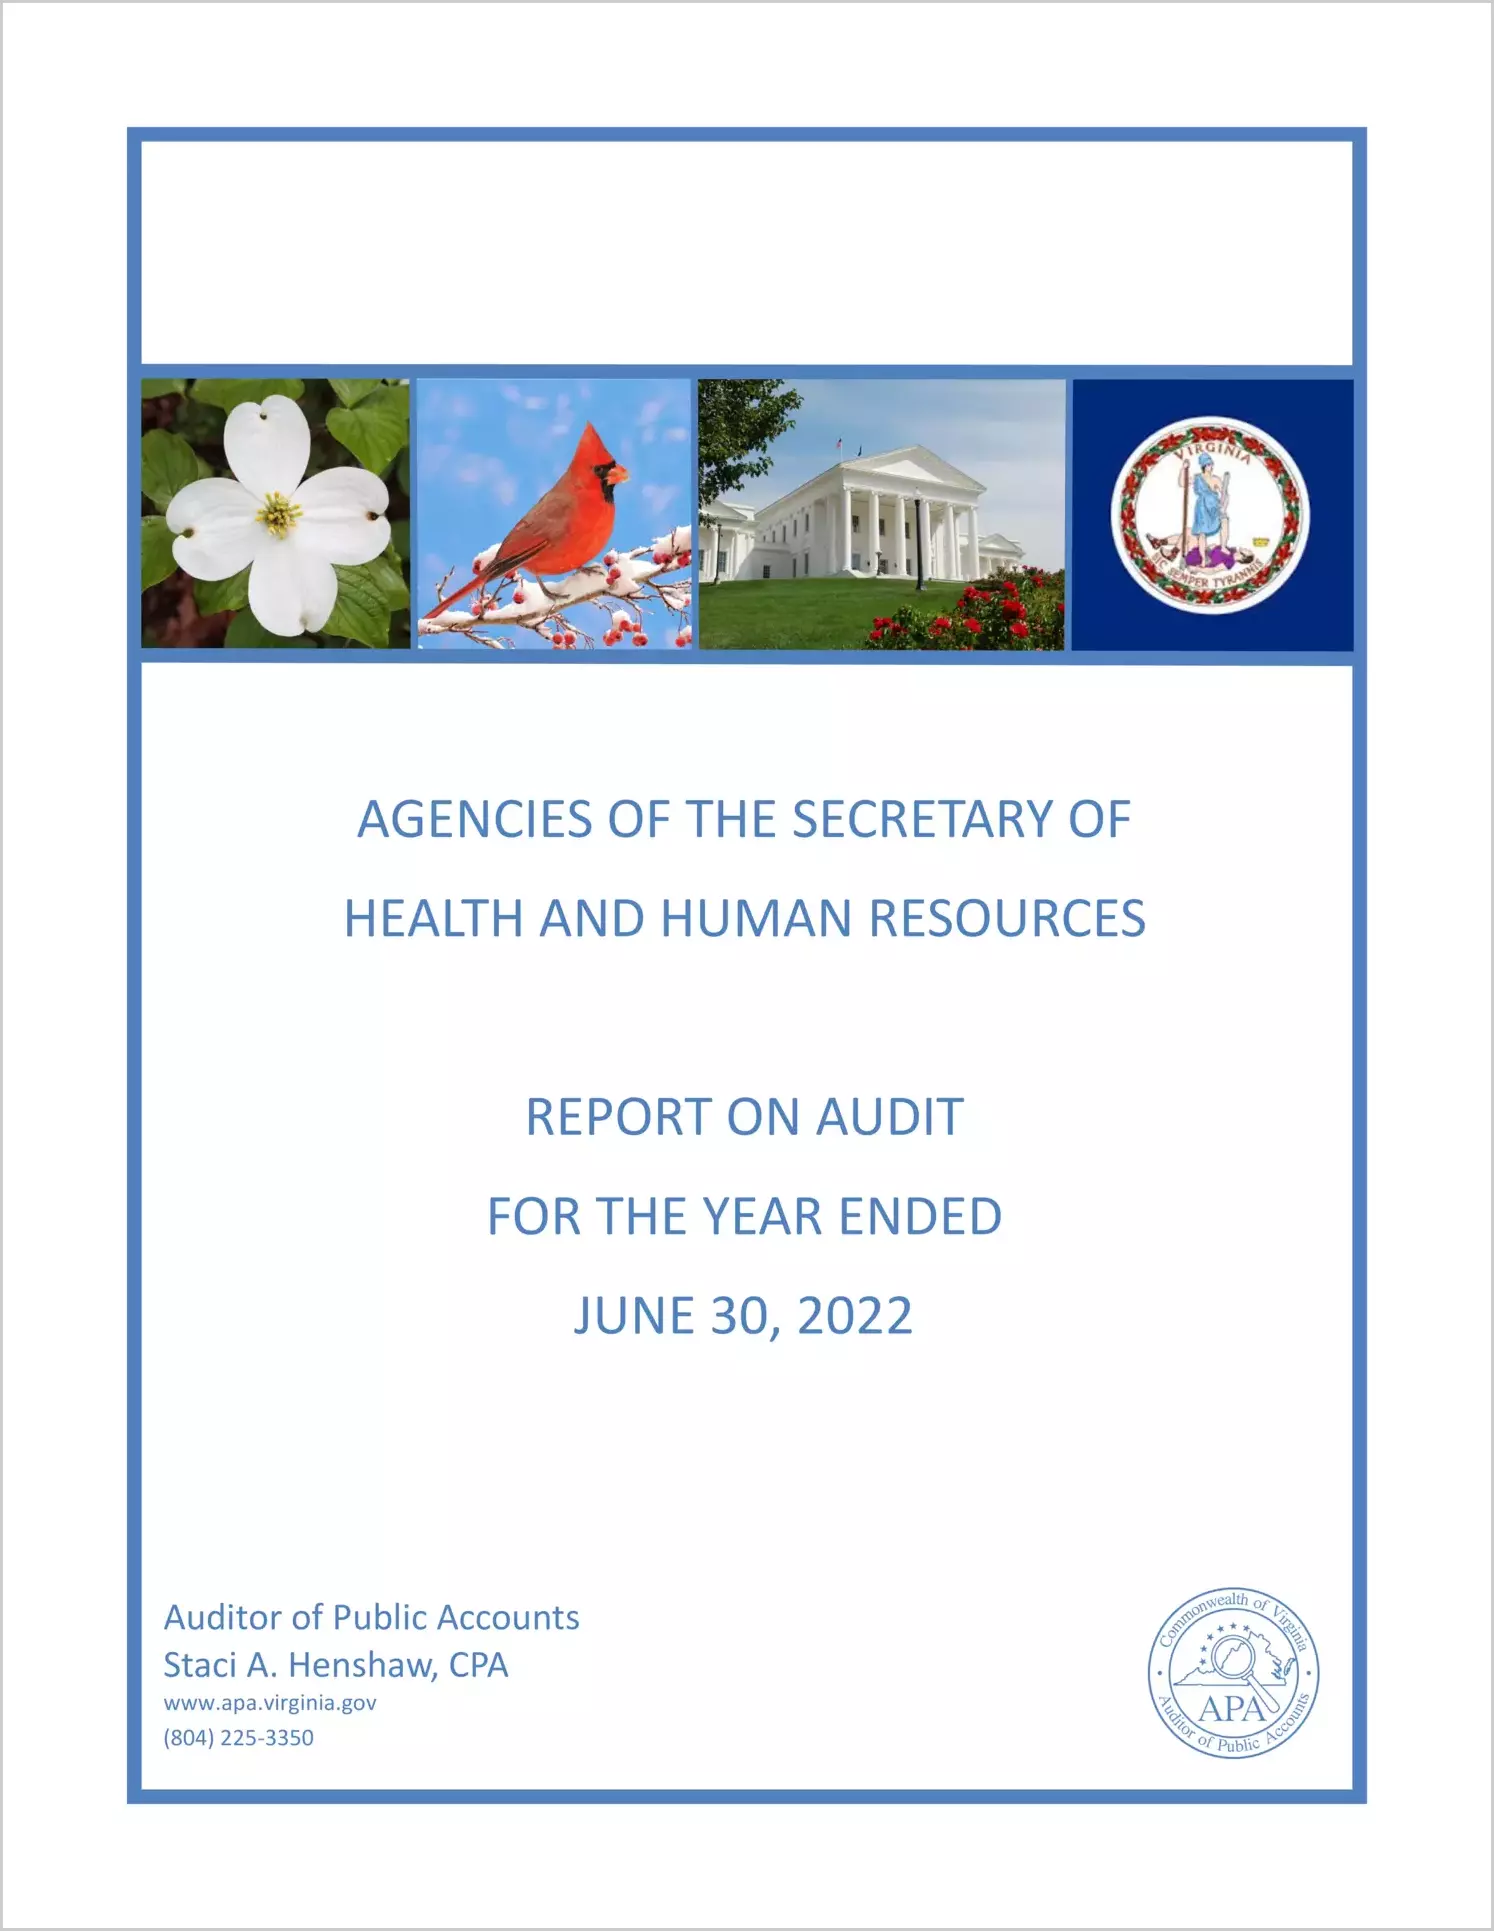 Agencies of the Secretary of Health and Human Resources for the year ended June 30, 2022